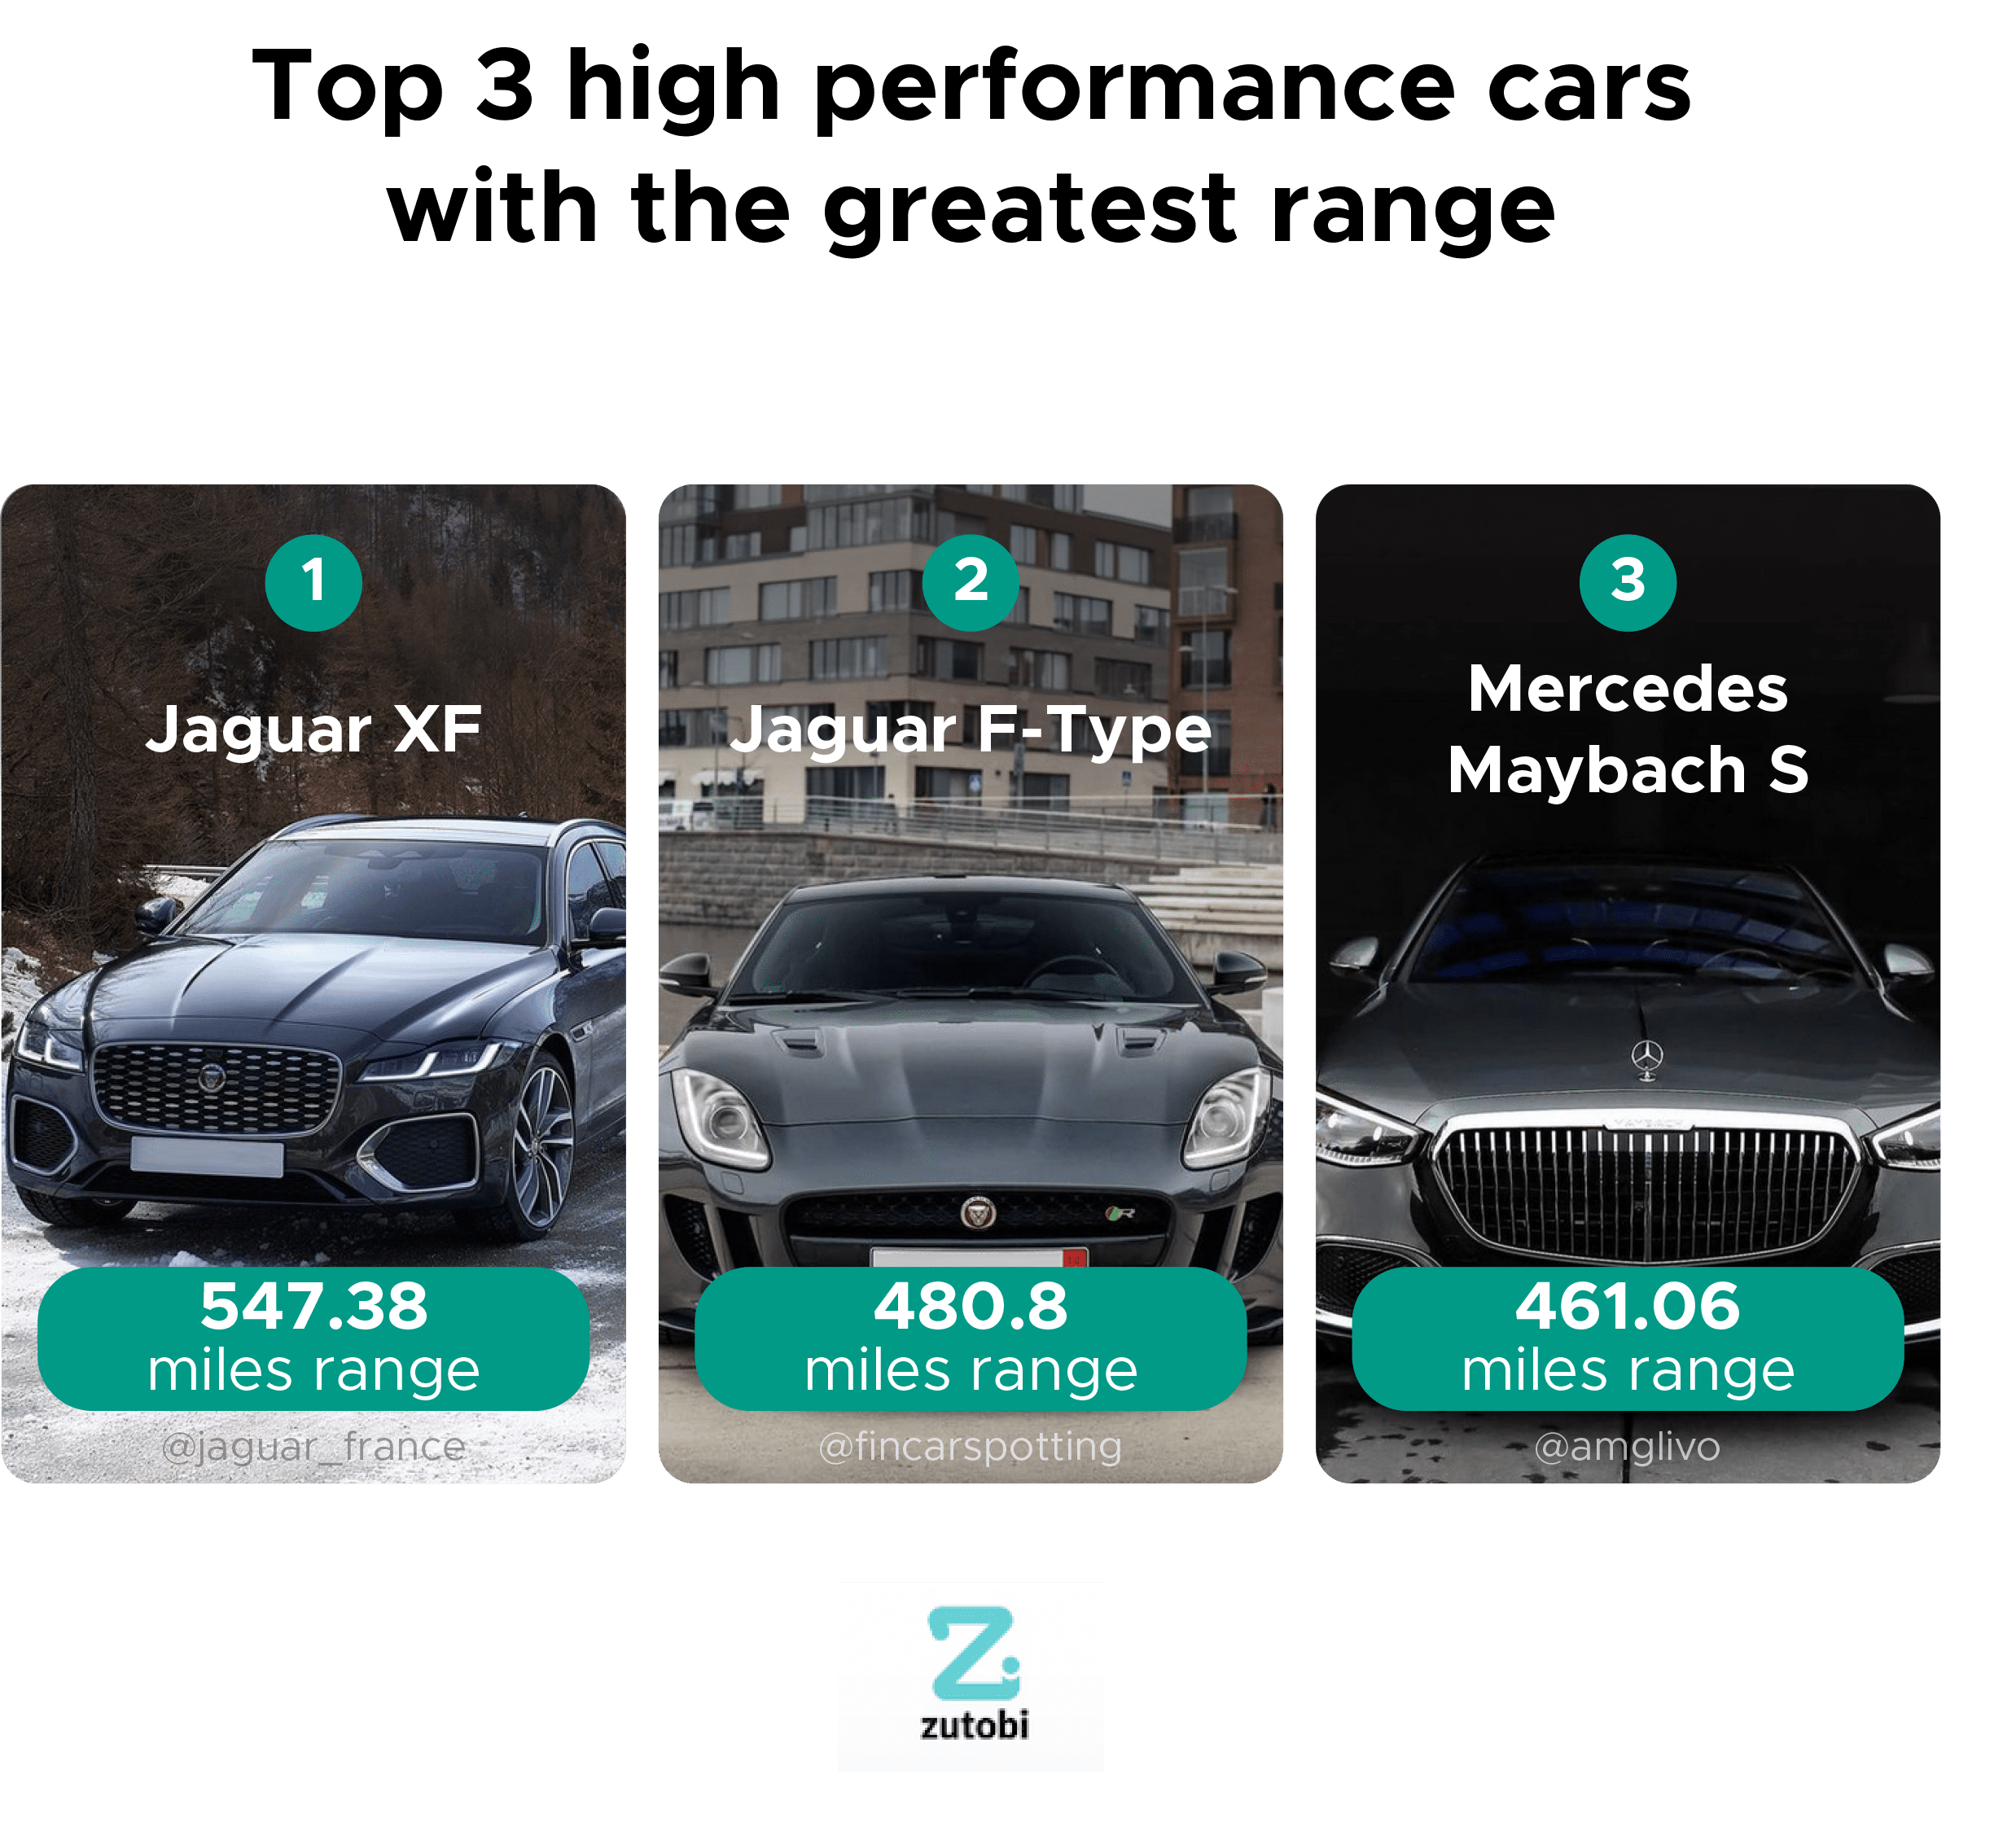 Top 3 high performance cars with the greatest range